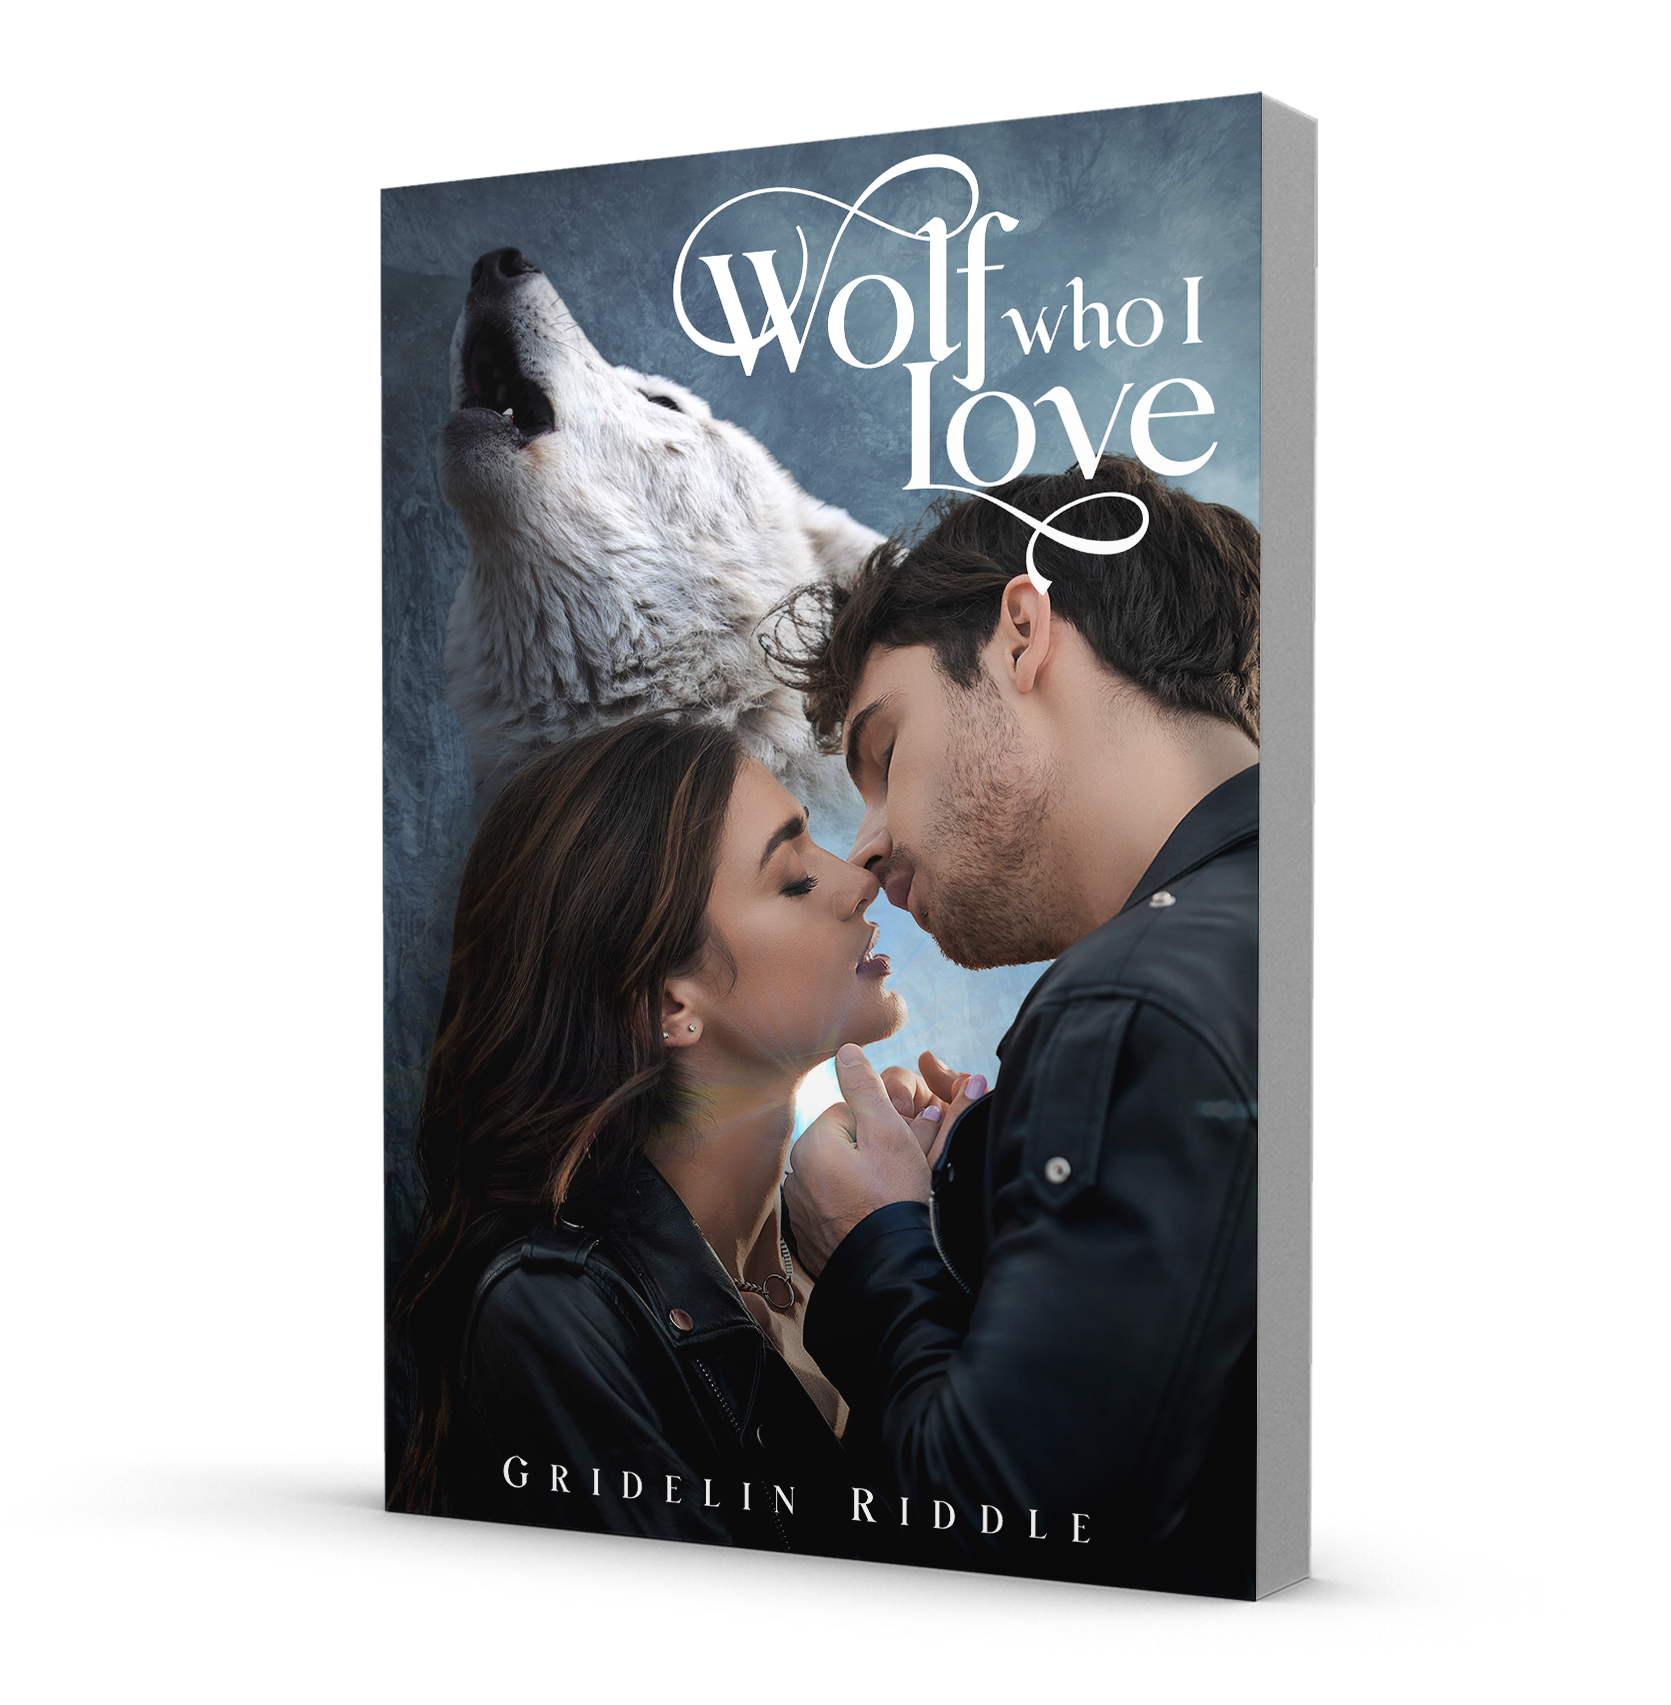 A paranormal romance book cover with a couple in modern clothes about to kiss, a howling wolf motif in the sky above them.